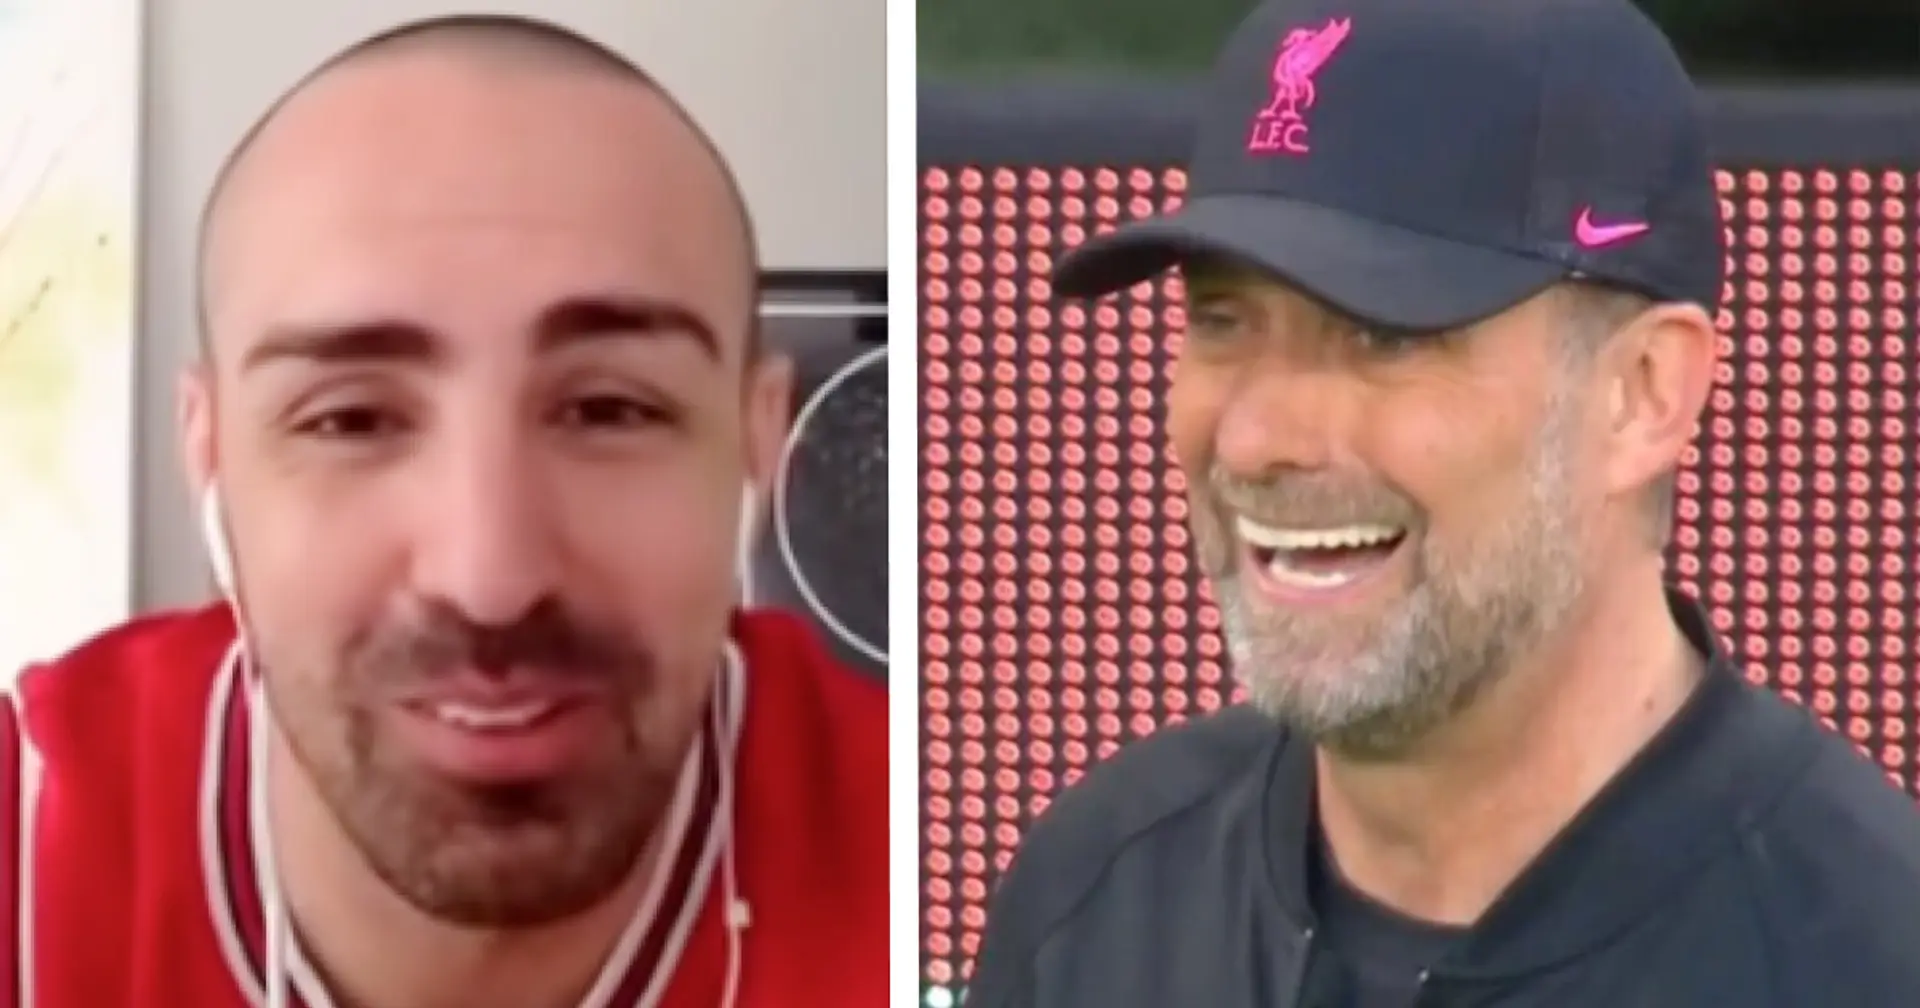 'You never know': Former Red Jose Enrique replies fan who says Newcastle will wipe floor with Liverpool